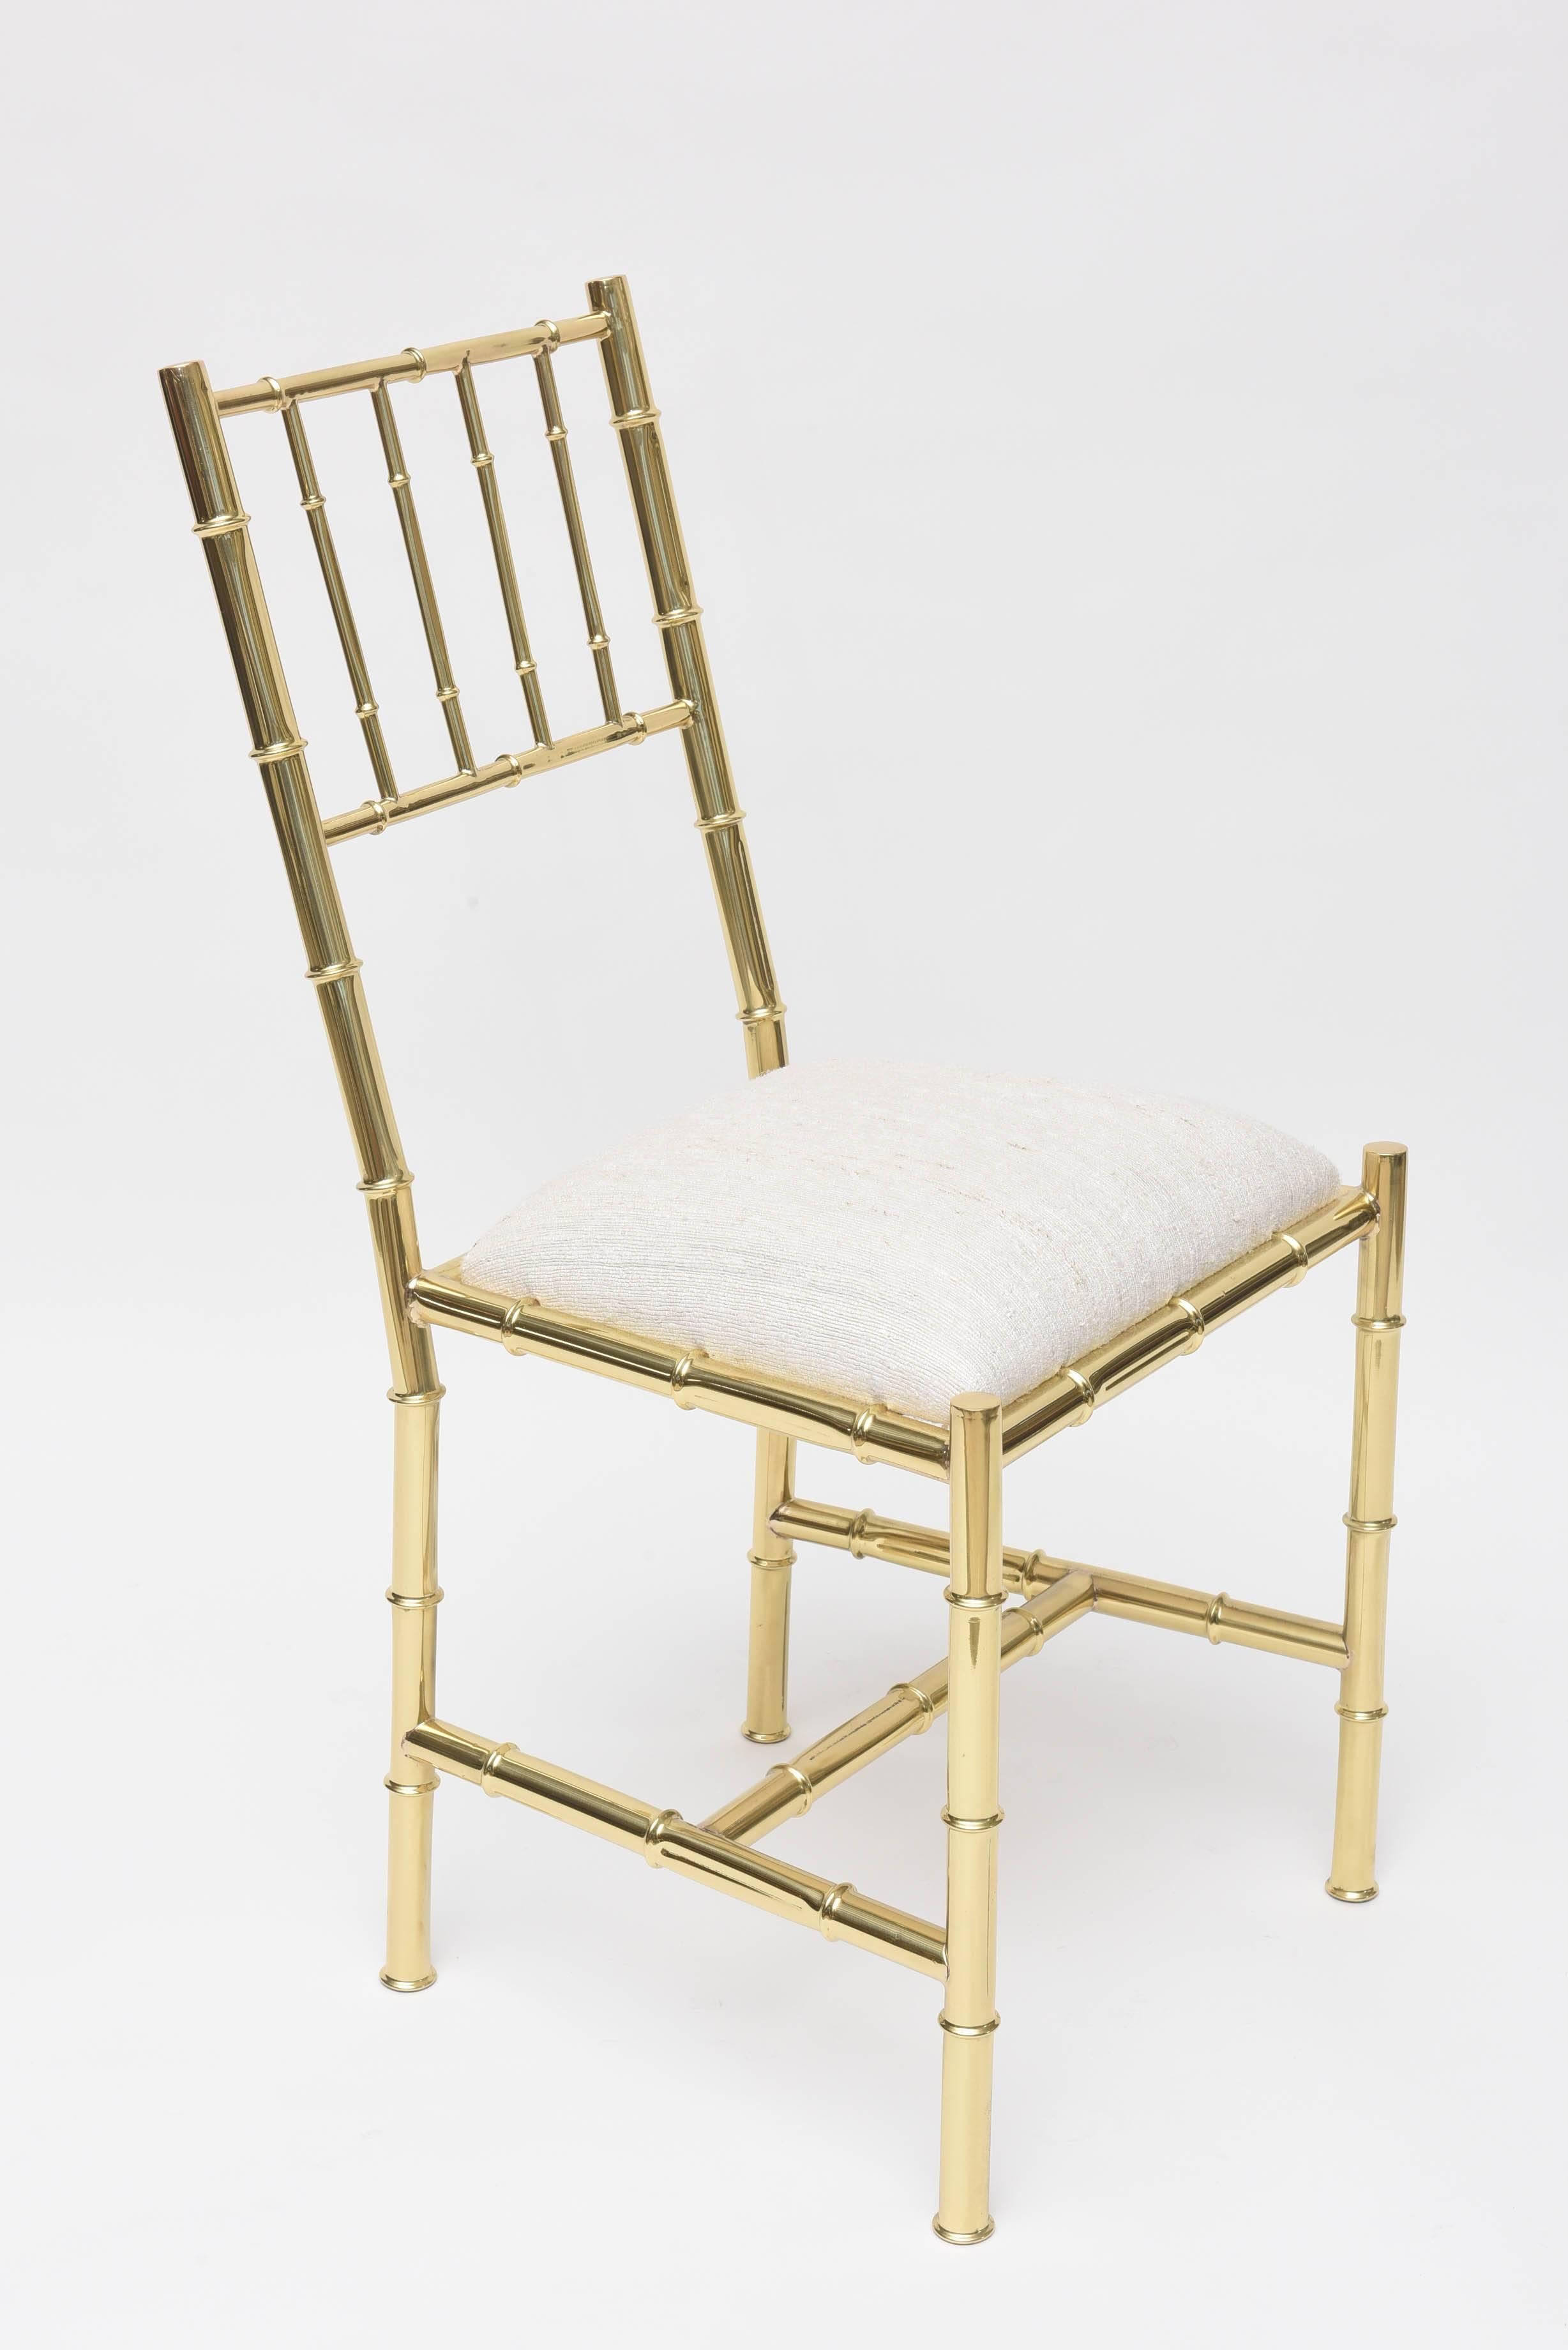 Hollywood Regency Italian Faux Bamboo Chair in Polished Brass